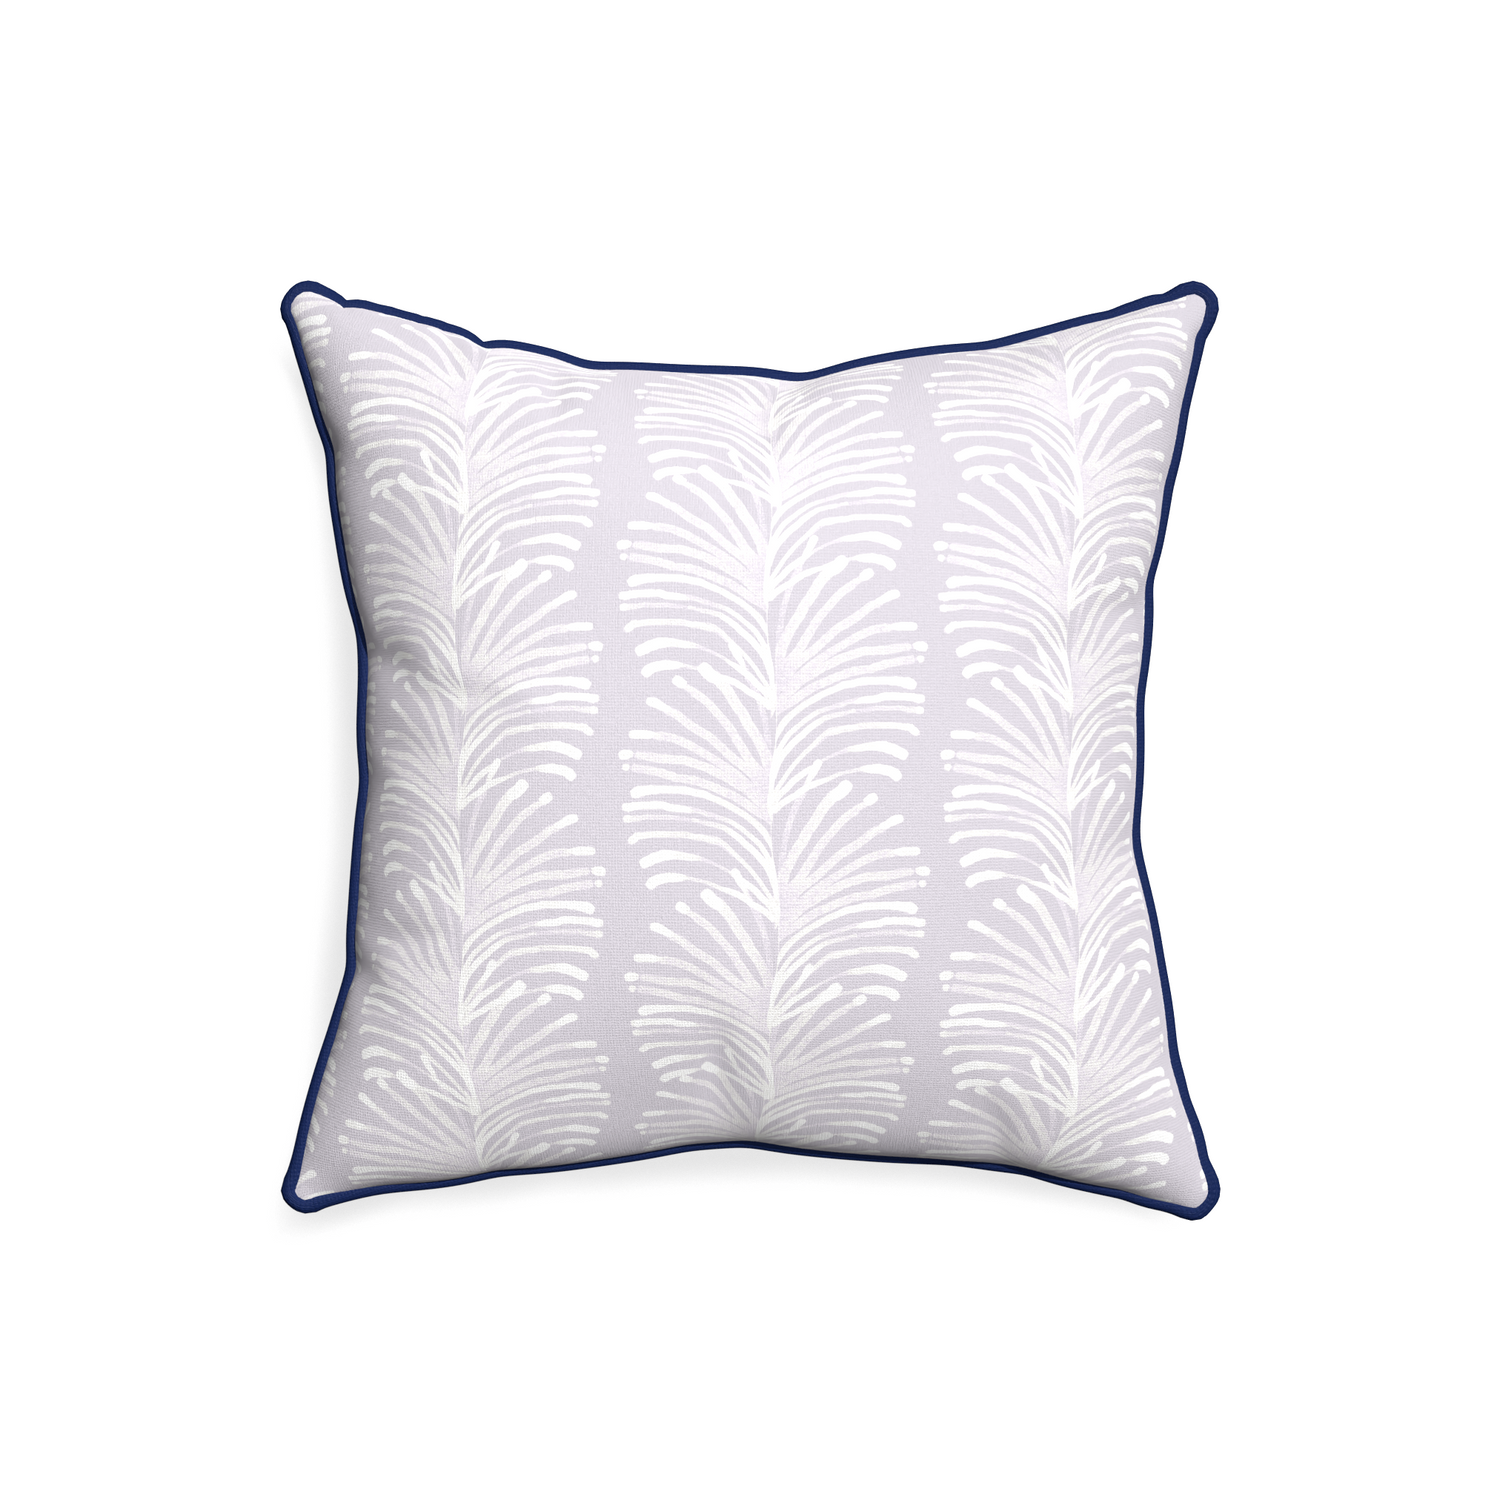 20-square emma lavender custom lavender botanical stripepillow with midnight piping on white background